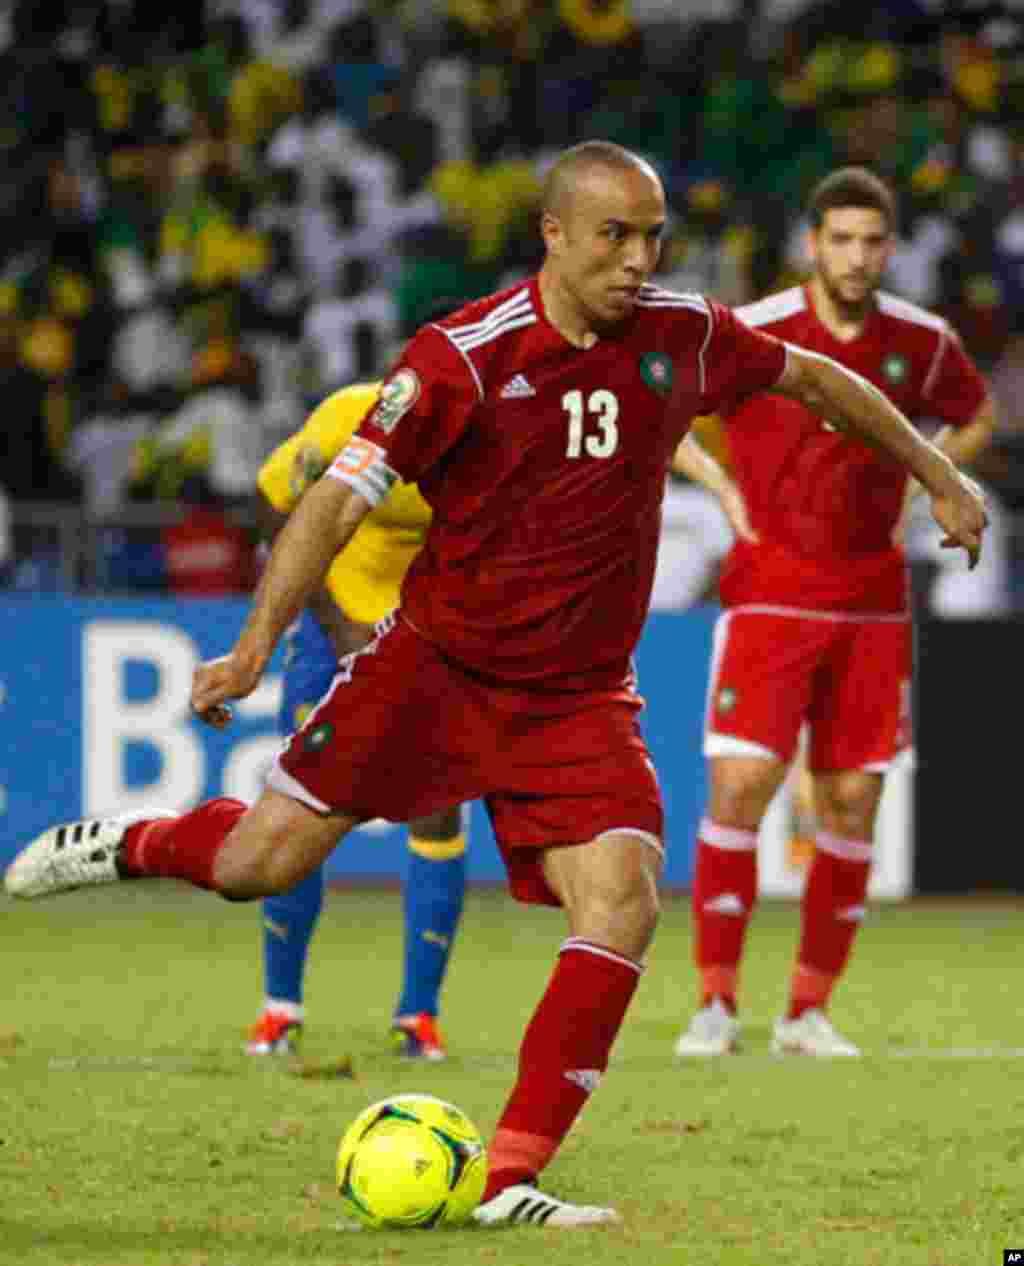 Morocco's Kharja takes a penalty kick against Gabon during their African Cup of Nations soccer match in Libreville